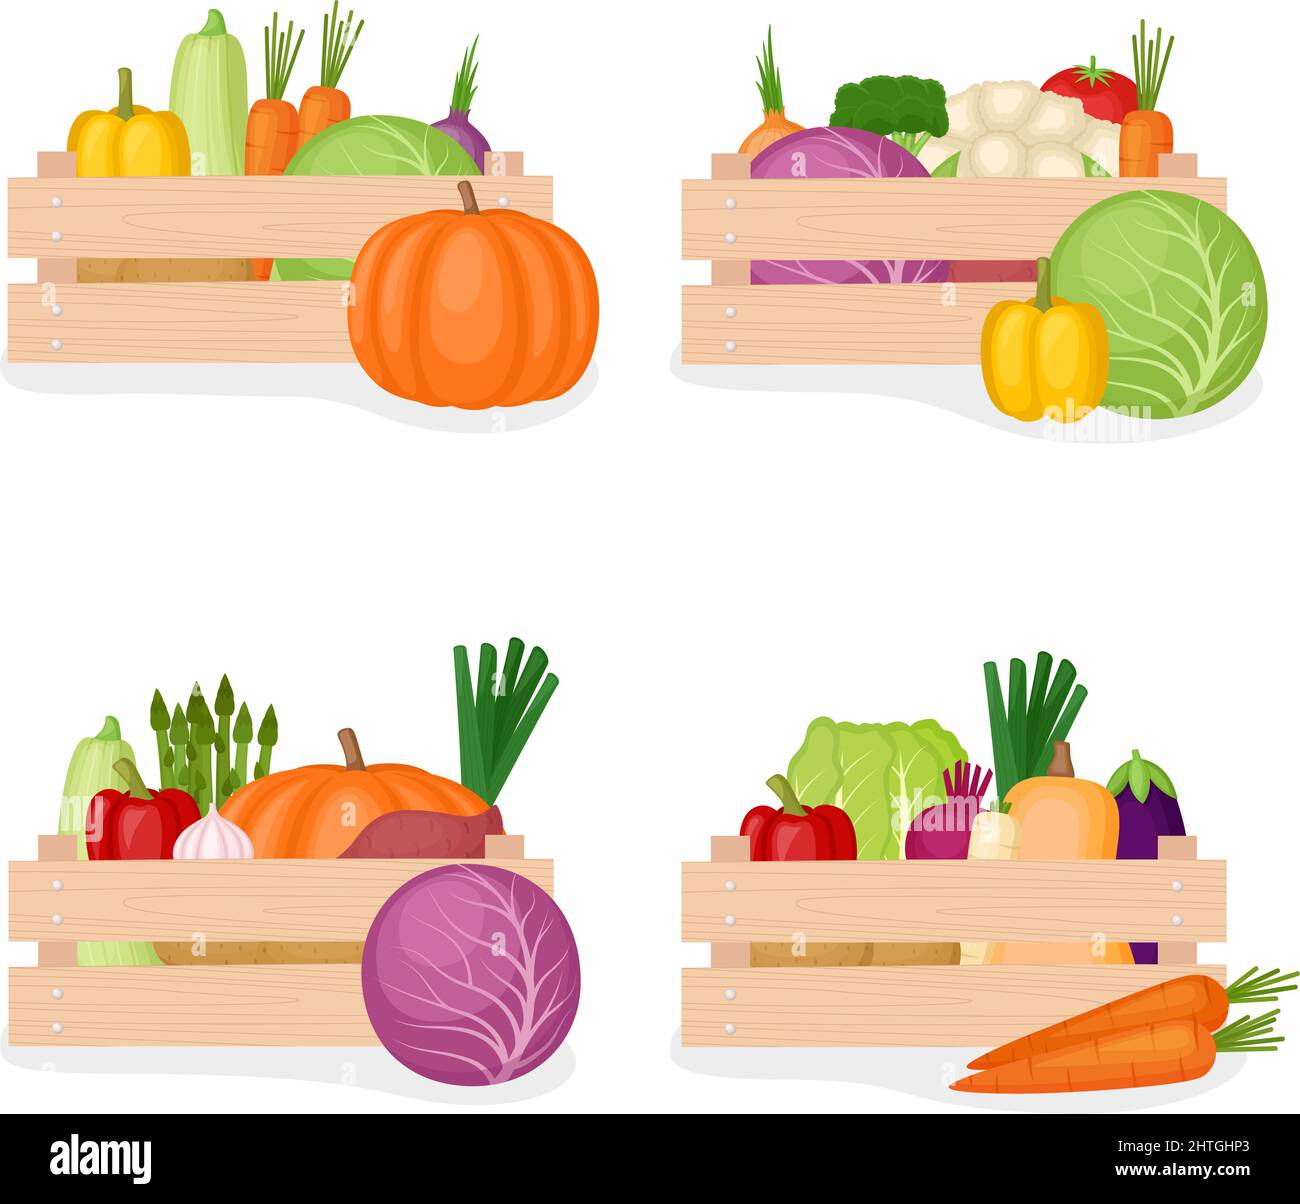 Set of wooden boxes with fresh farm vegetables, vector illustration Stock Vector